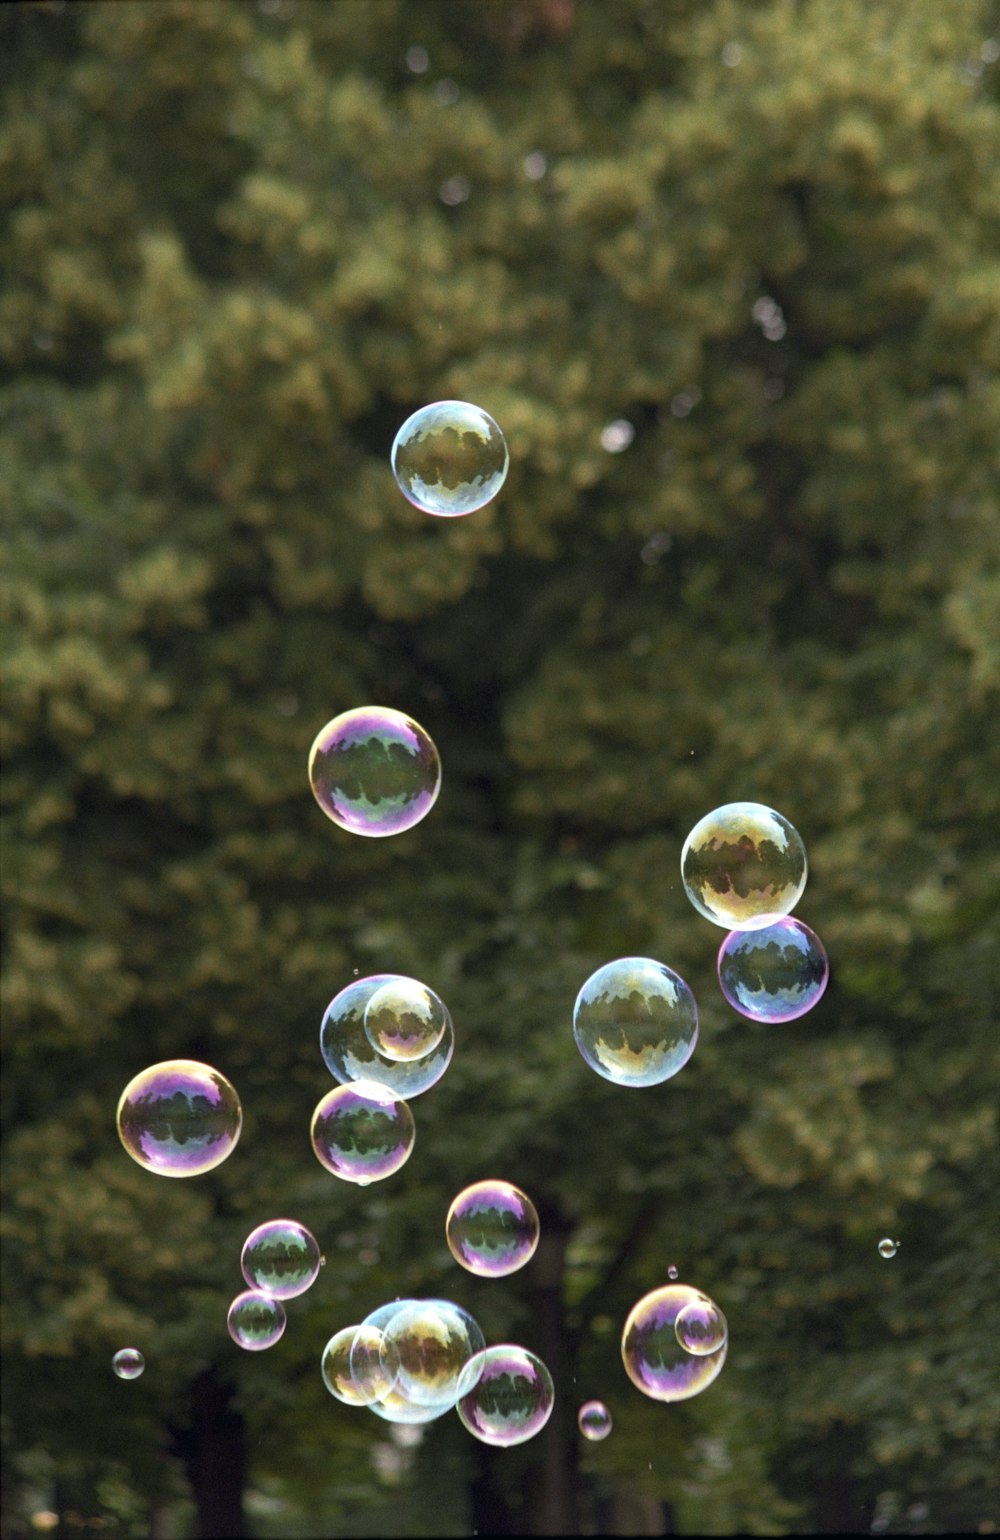 green and white bubbles during daytime